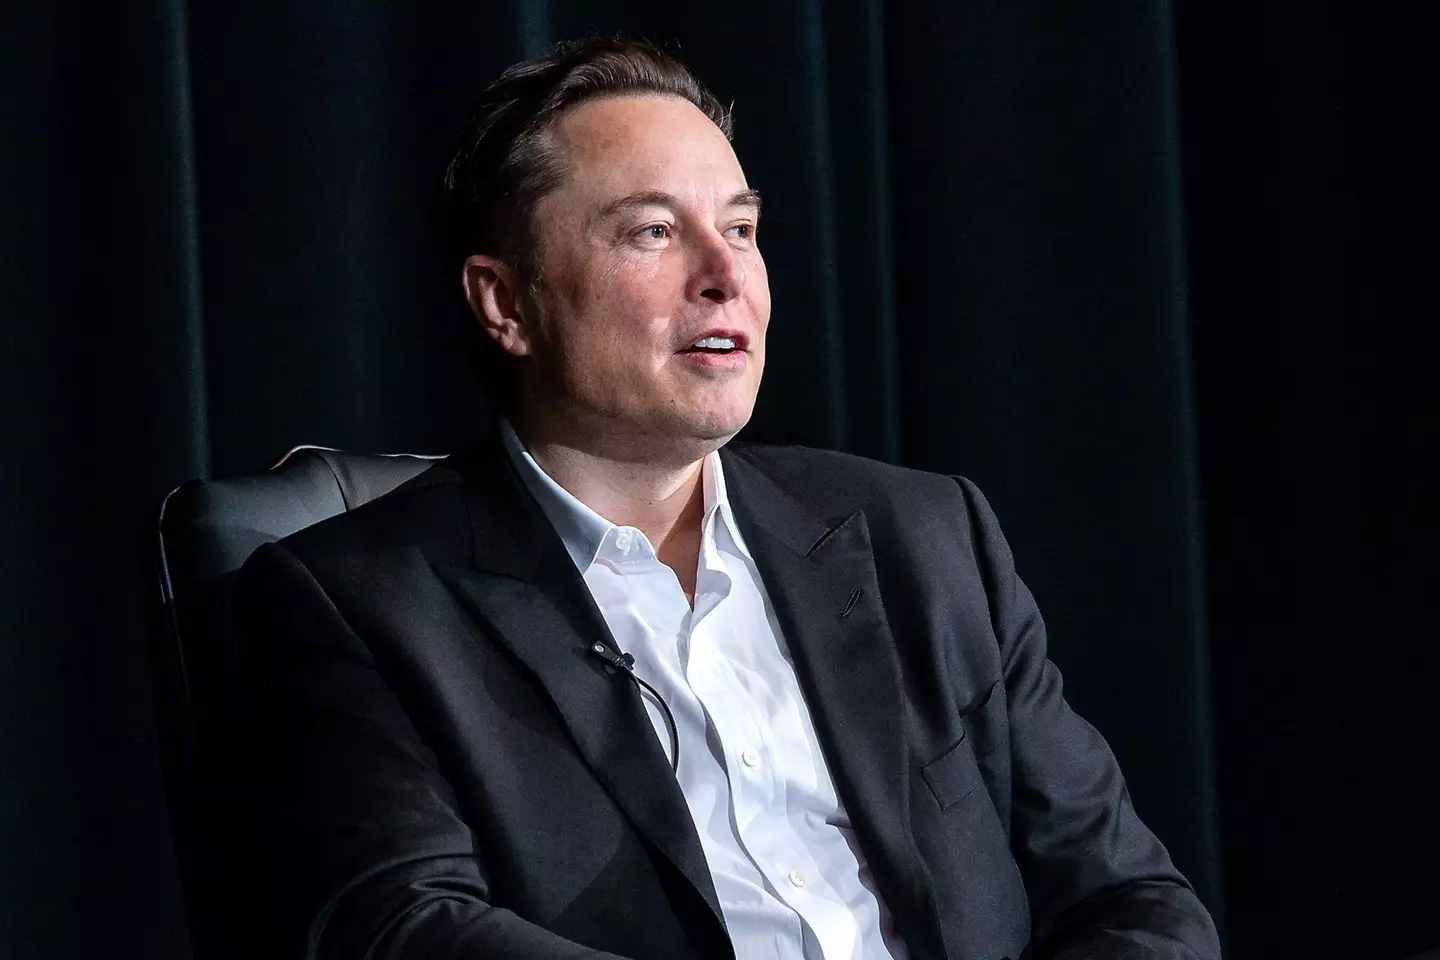 Elon Musk, who owns Tesla, has yet to comment on the recall.